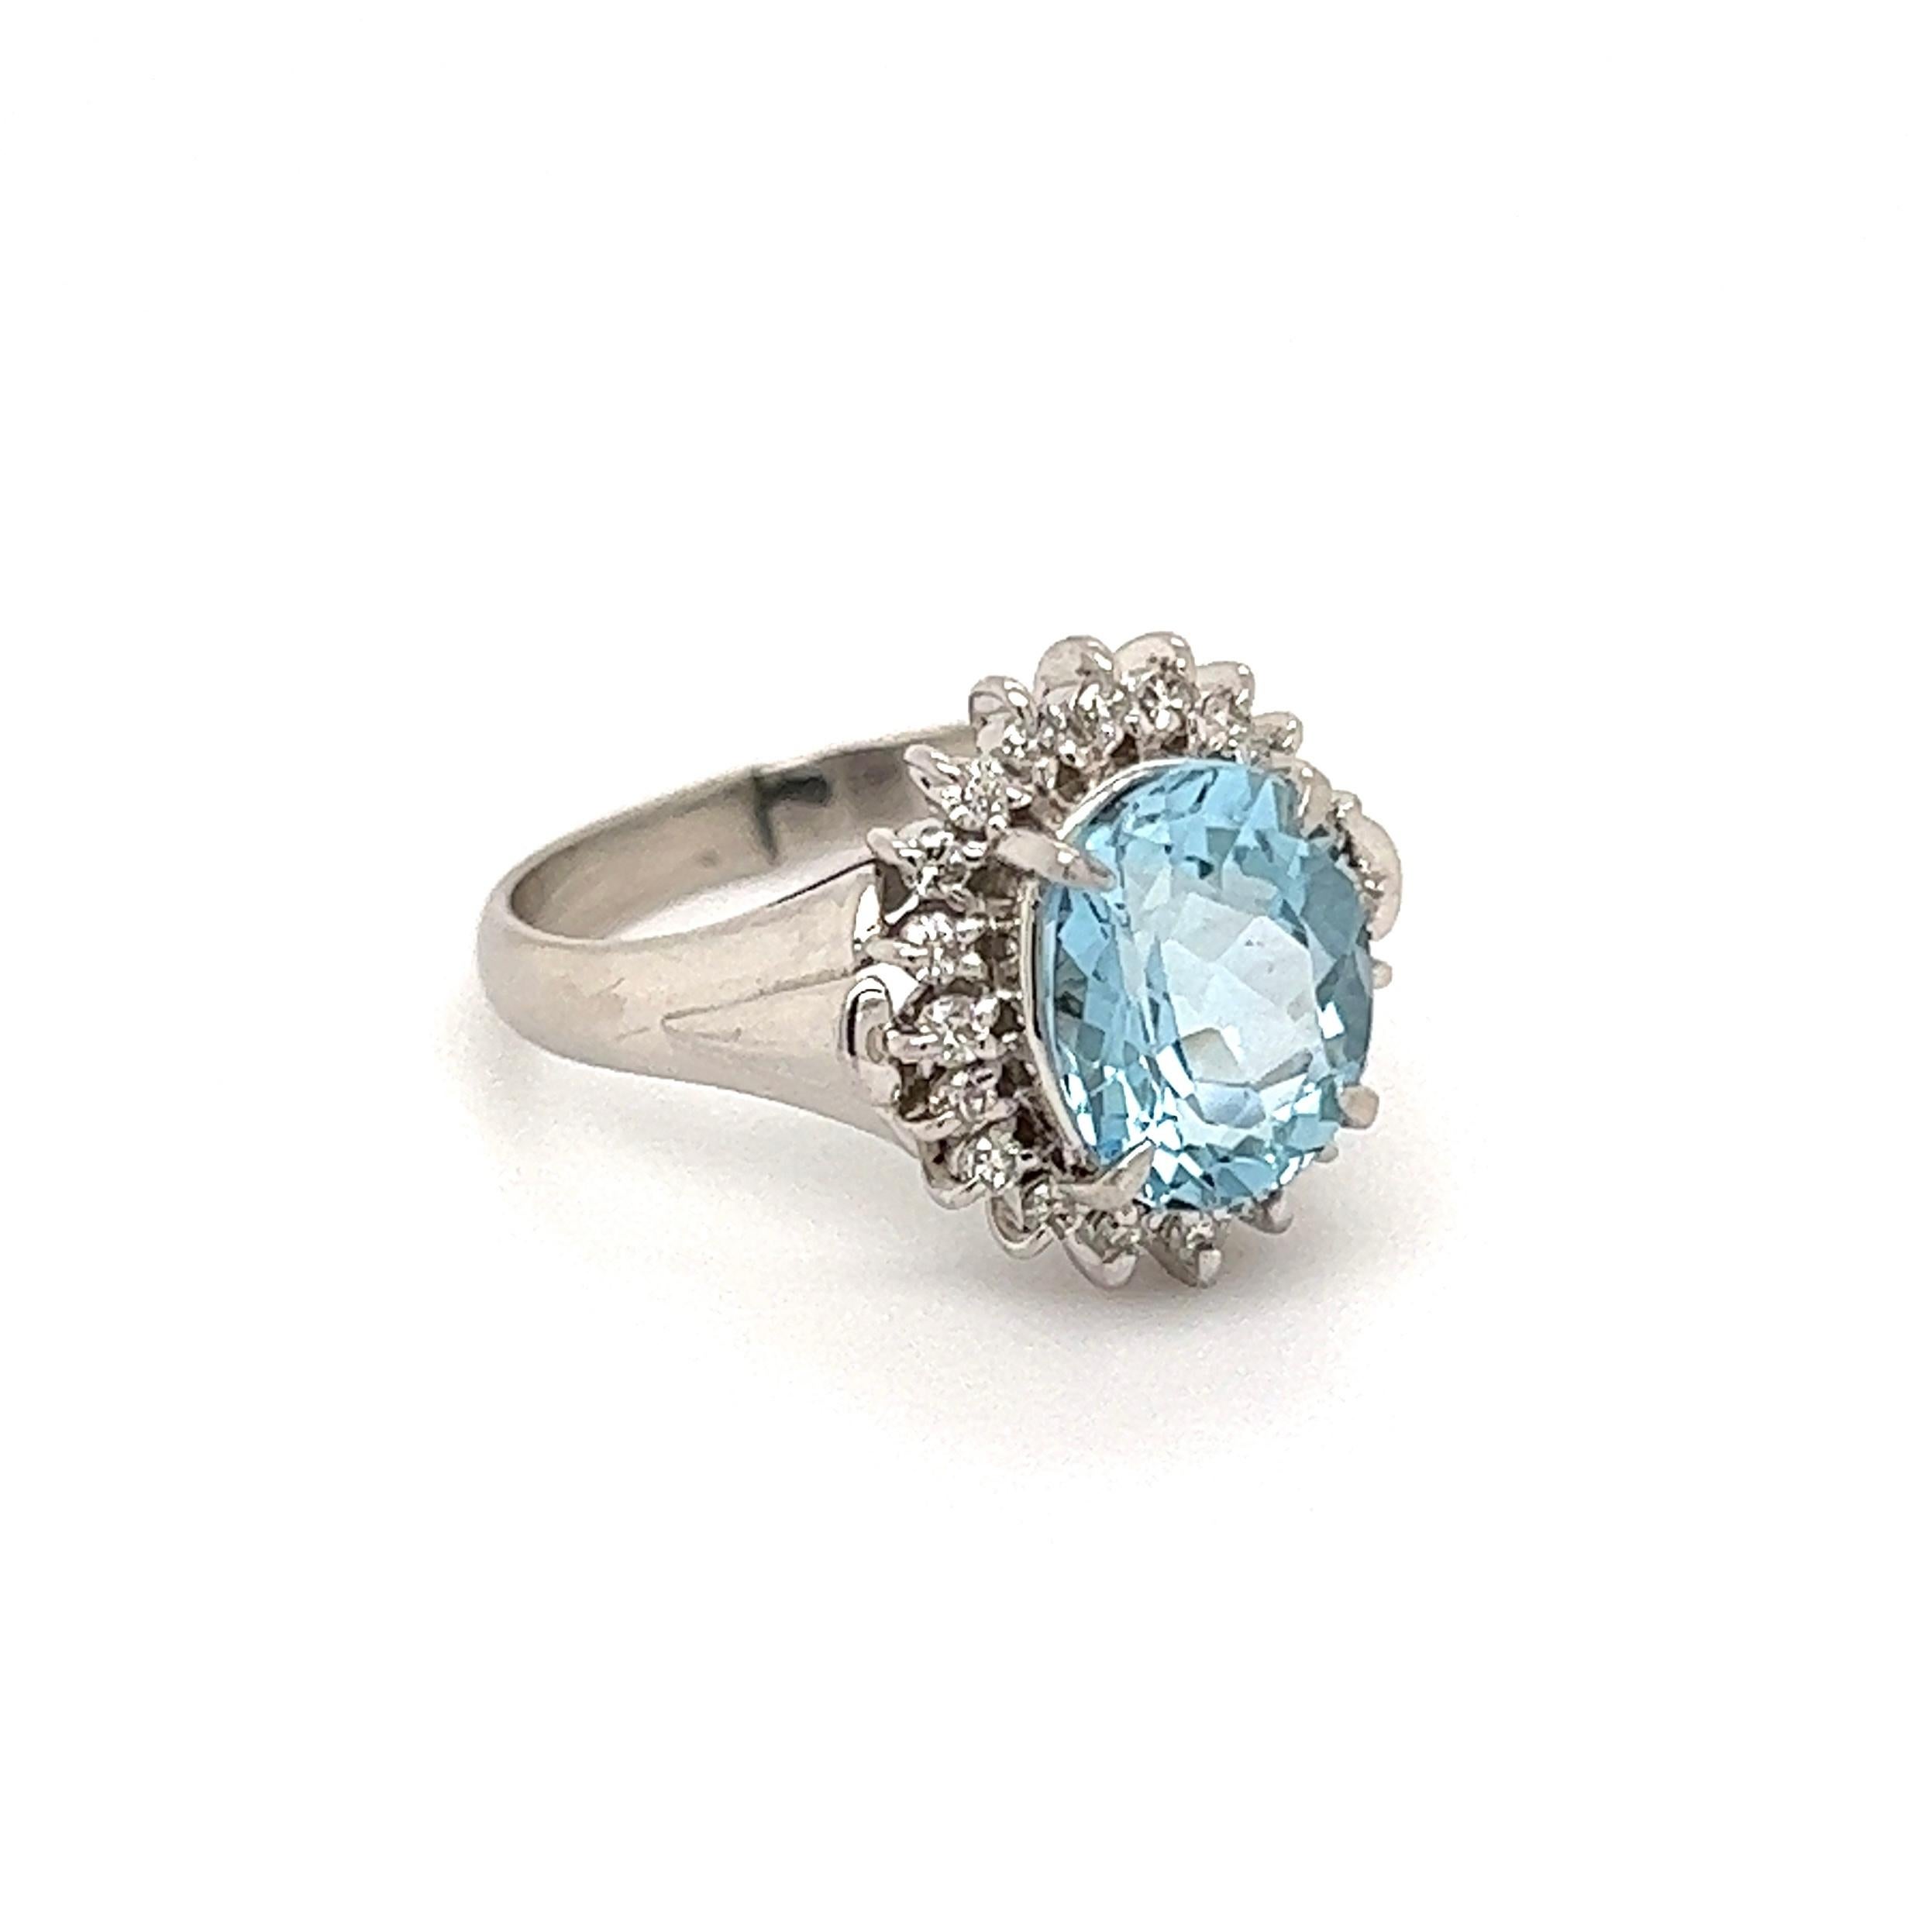 Simply Beautiful! Aquamarine and Diamond Platinum Cocktail Ring. Center securely Hand set with an Oval Aquamarine, weighing approx. 2.11 Carats surrounded by Diamonds weighing approx. 0.23tcw. Hand crafted platinum mounting. Measuring approx. 0.98”